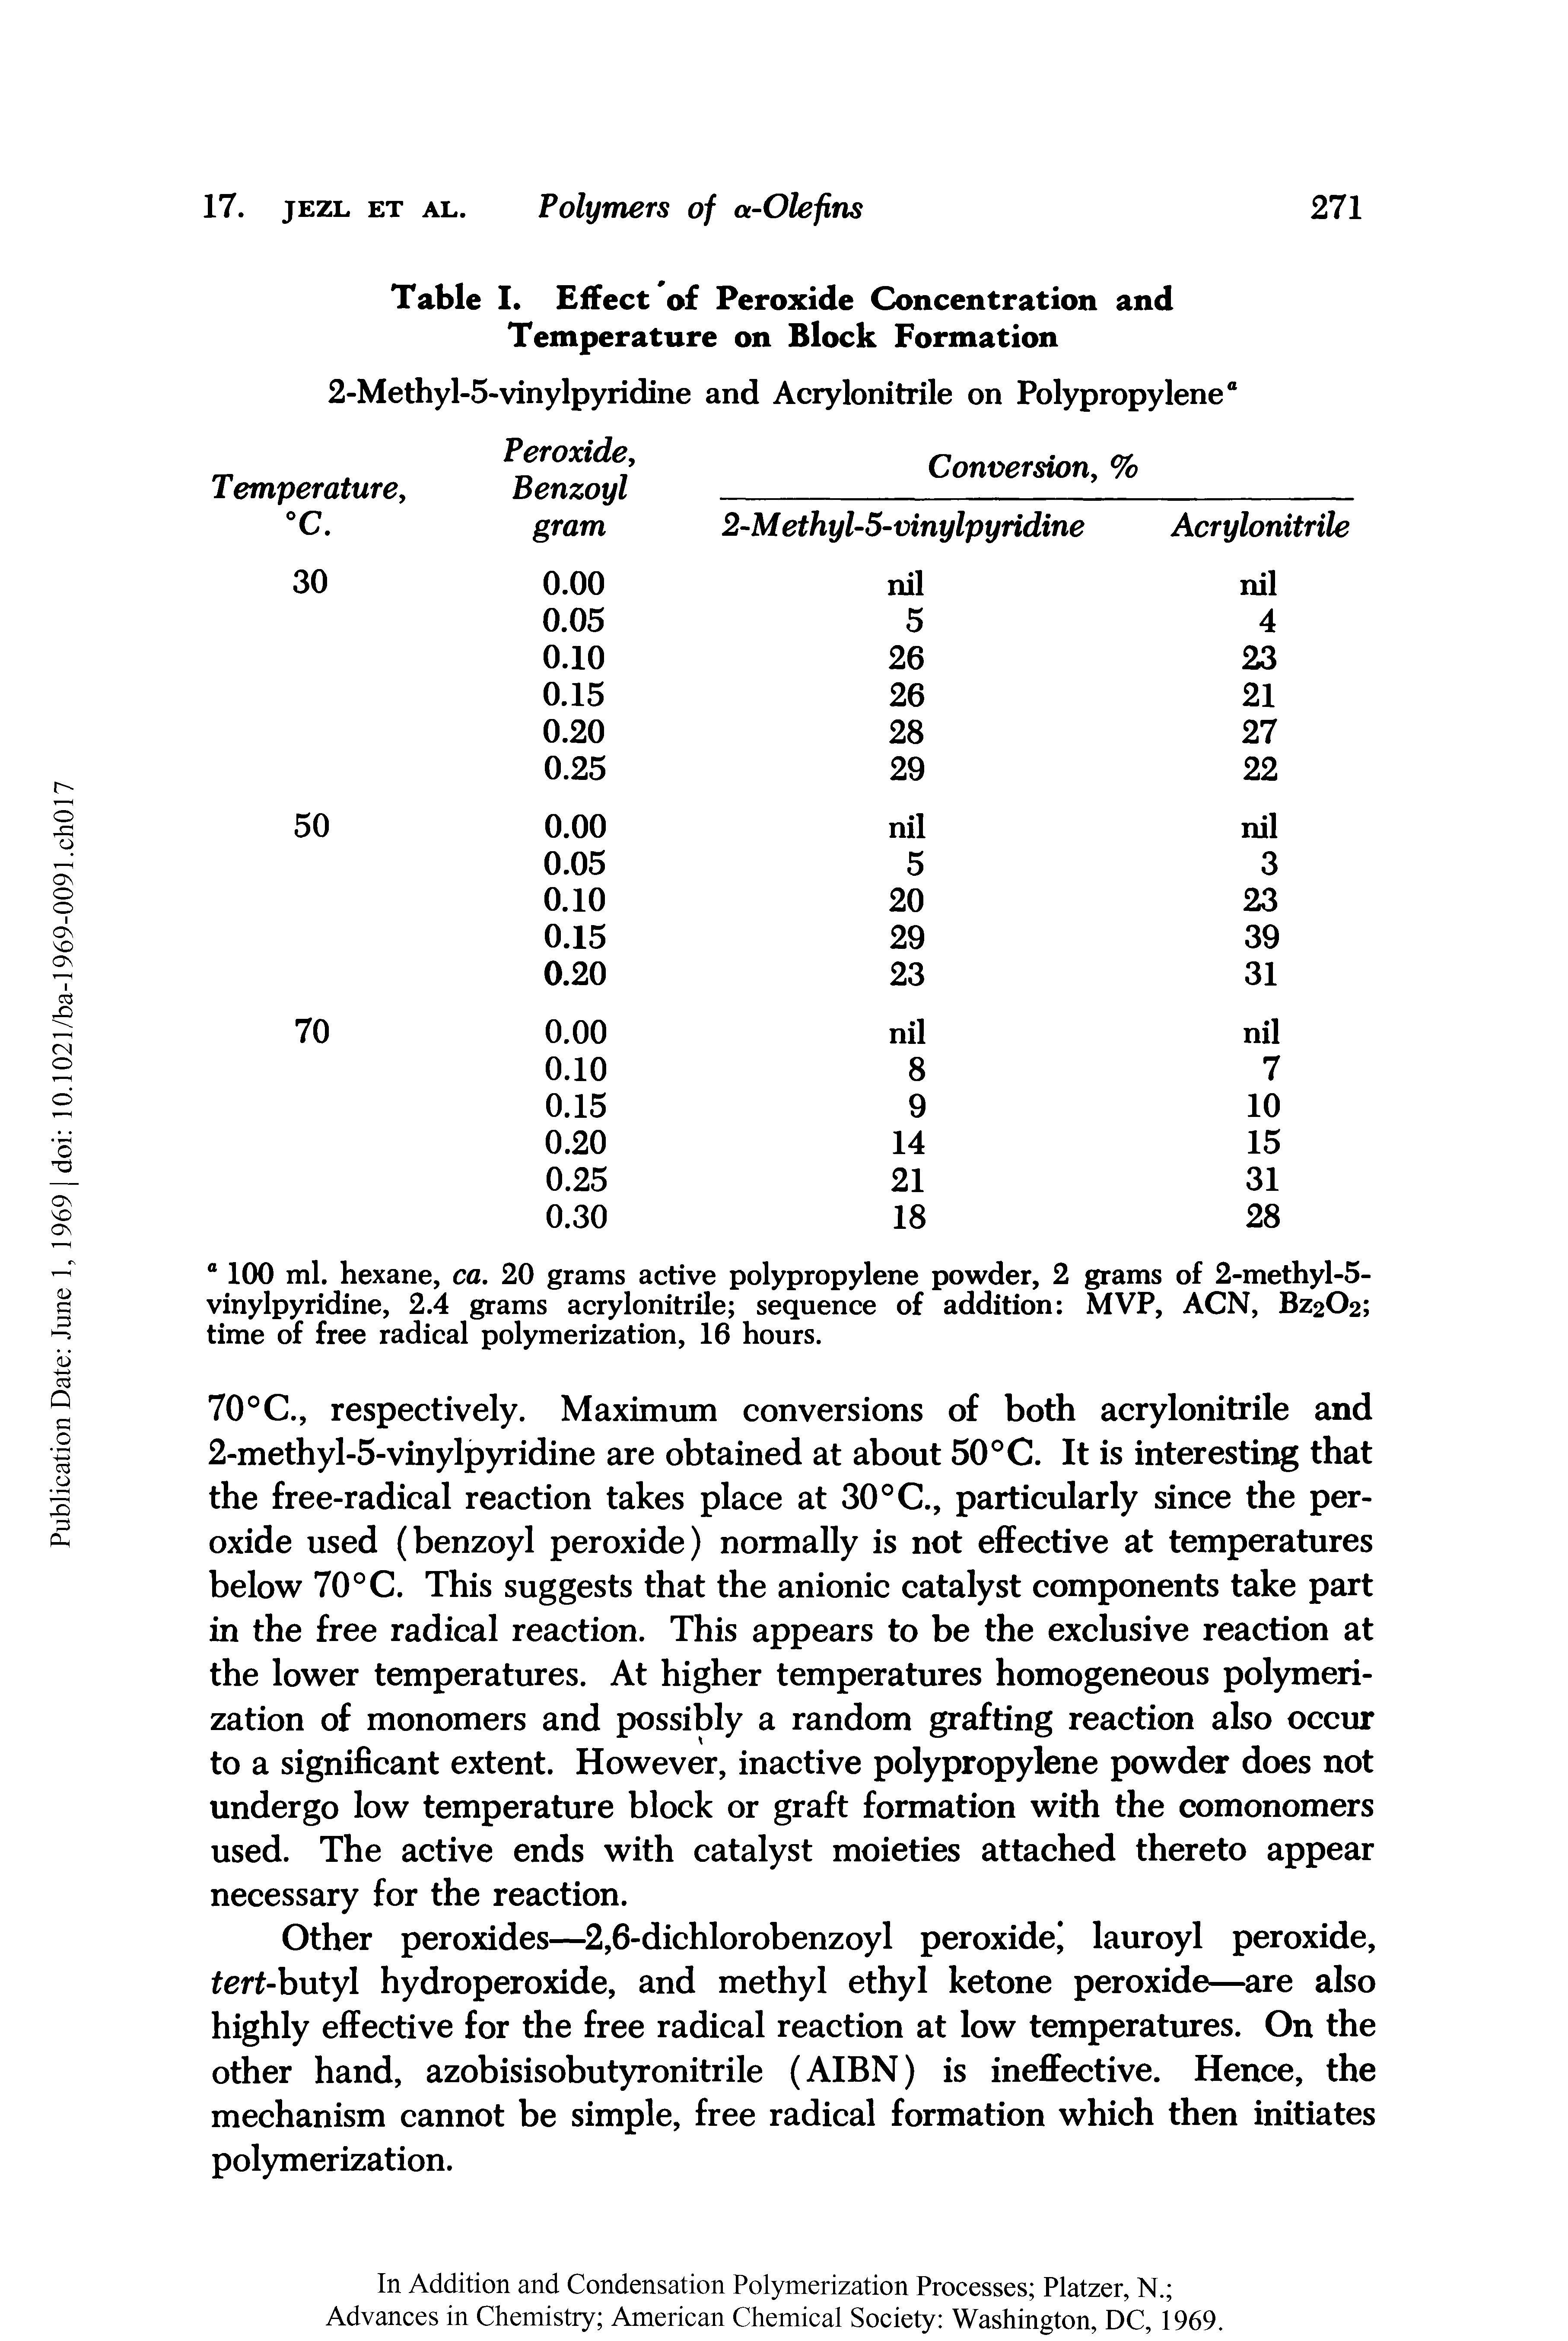 Table I. Effect of Peroxide Concentration and Temperature on Block Formation...